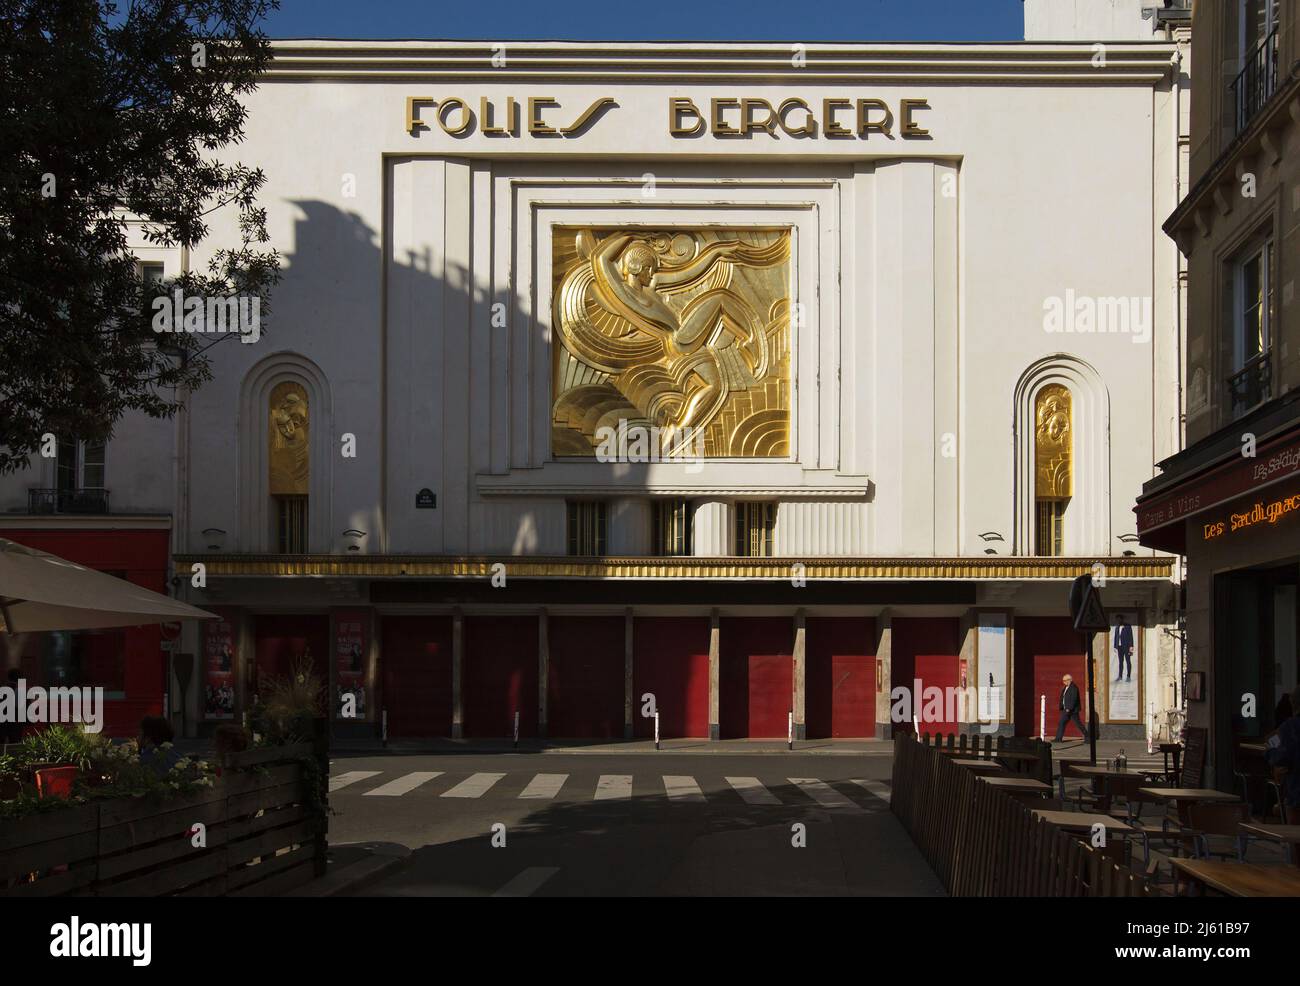 Main facade of the Folies Bergère Cabaret in Paris, France. Russian ballerina Lila Nicolska also known as Elisabeth Nikolskaia and Jelizaveta Nikolská (1904-1955) is depicted in the gilded relief 'La danseuse' designed by French sculptor Maurice Pico (1926). Stock Photo